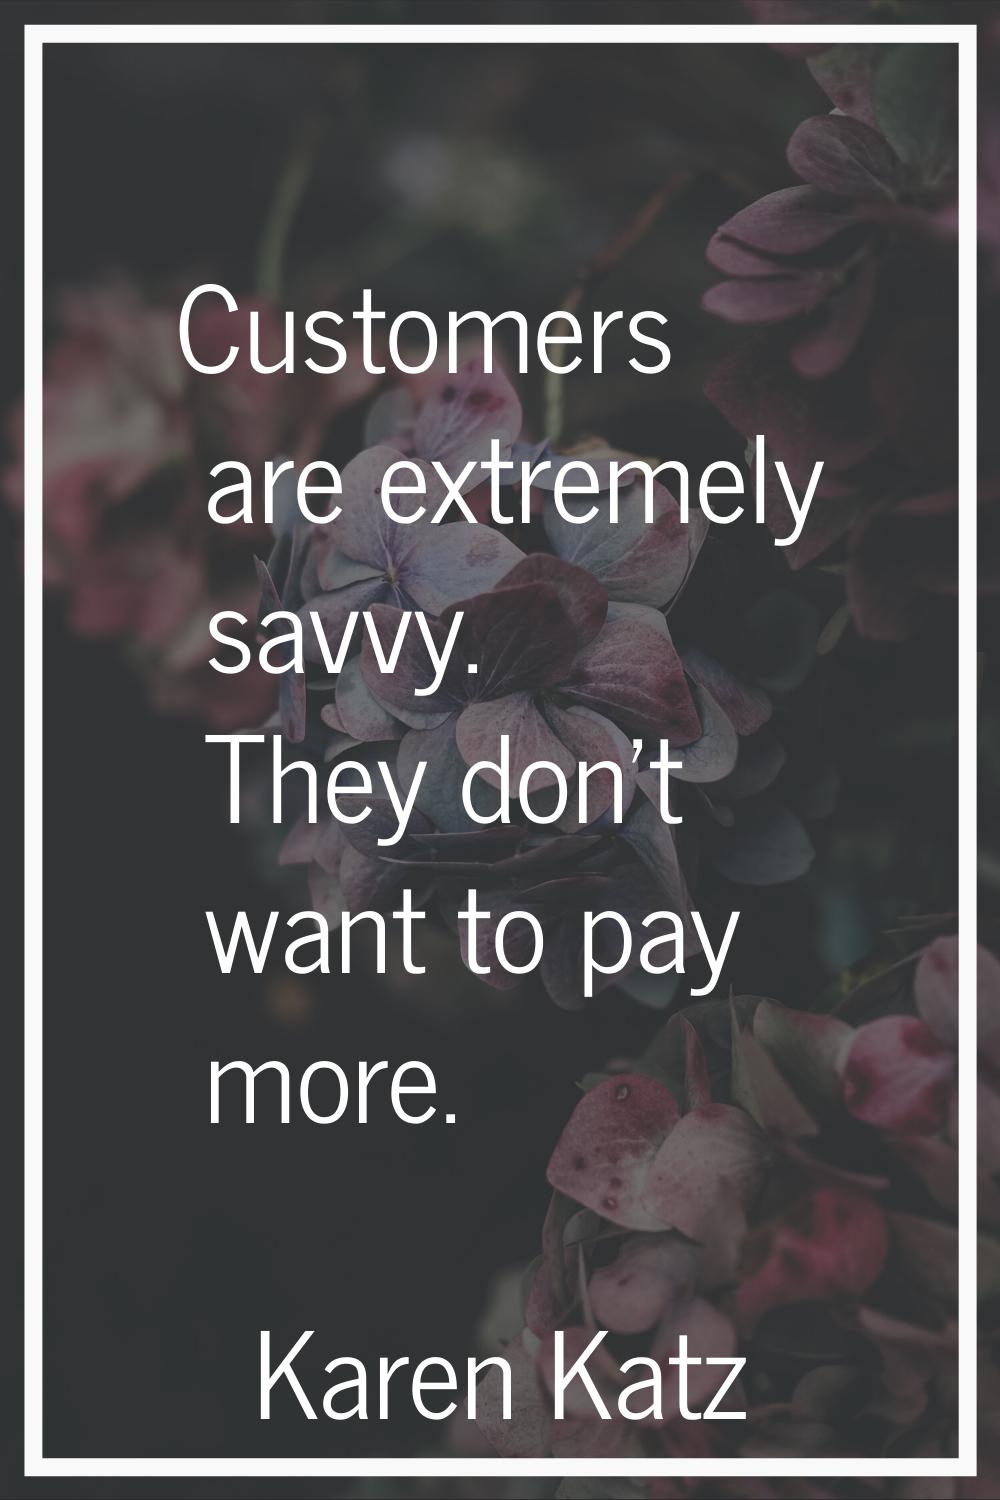 Customers are extremely savvy. They don't want to pay more.